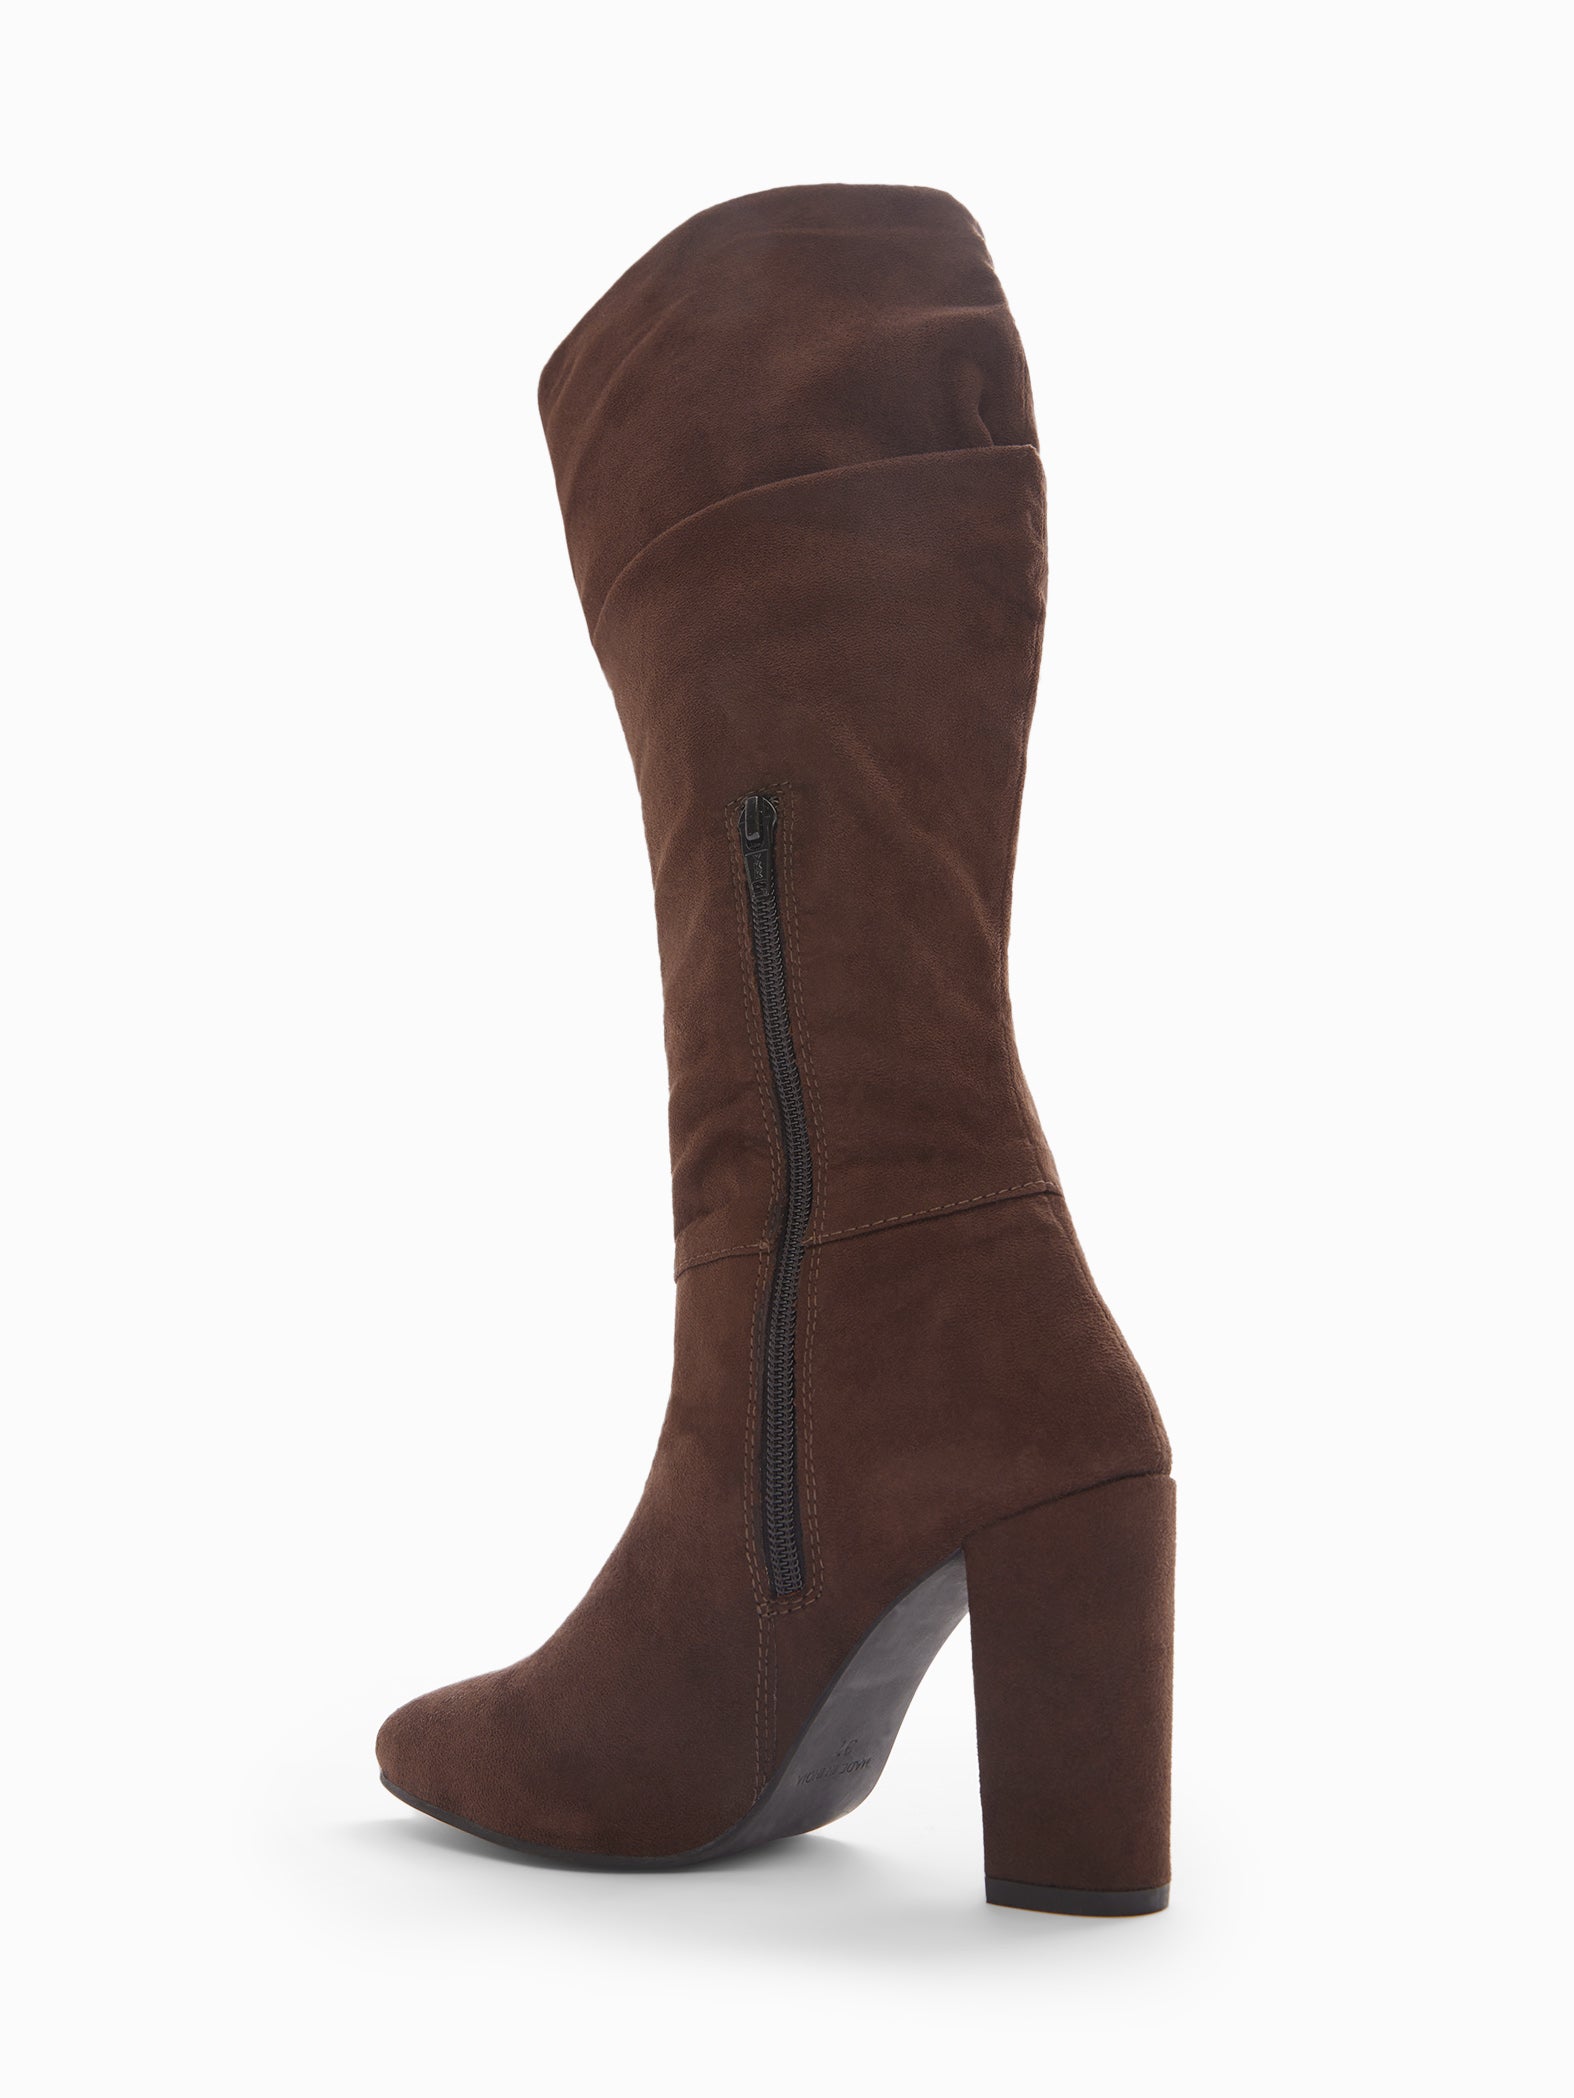 Chocolate Scrunched Boots